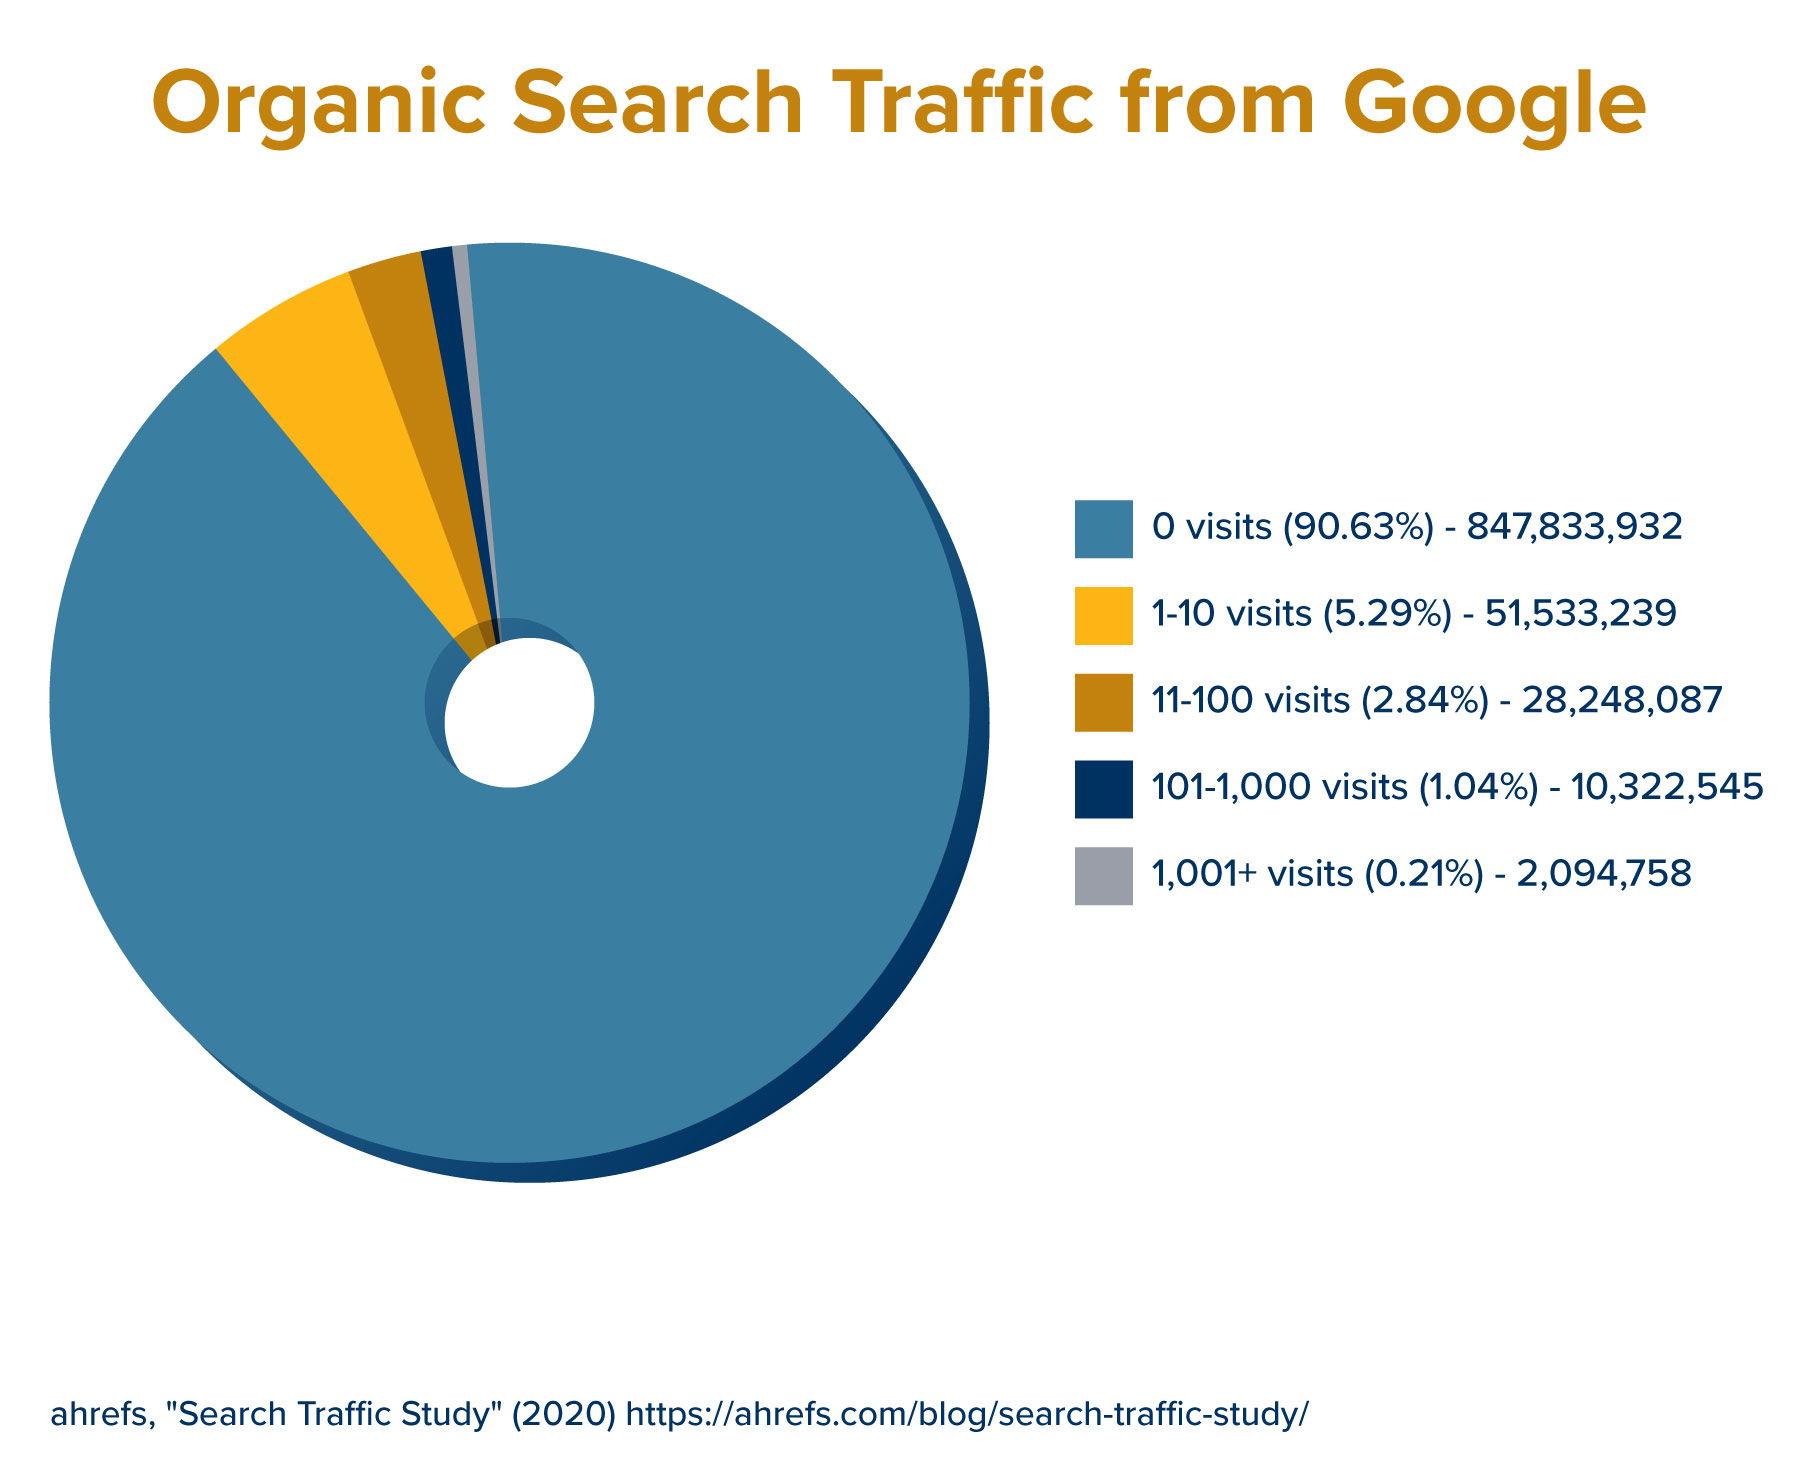 An image displaying organic search traffic numbers from ahrefs.